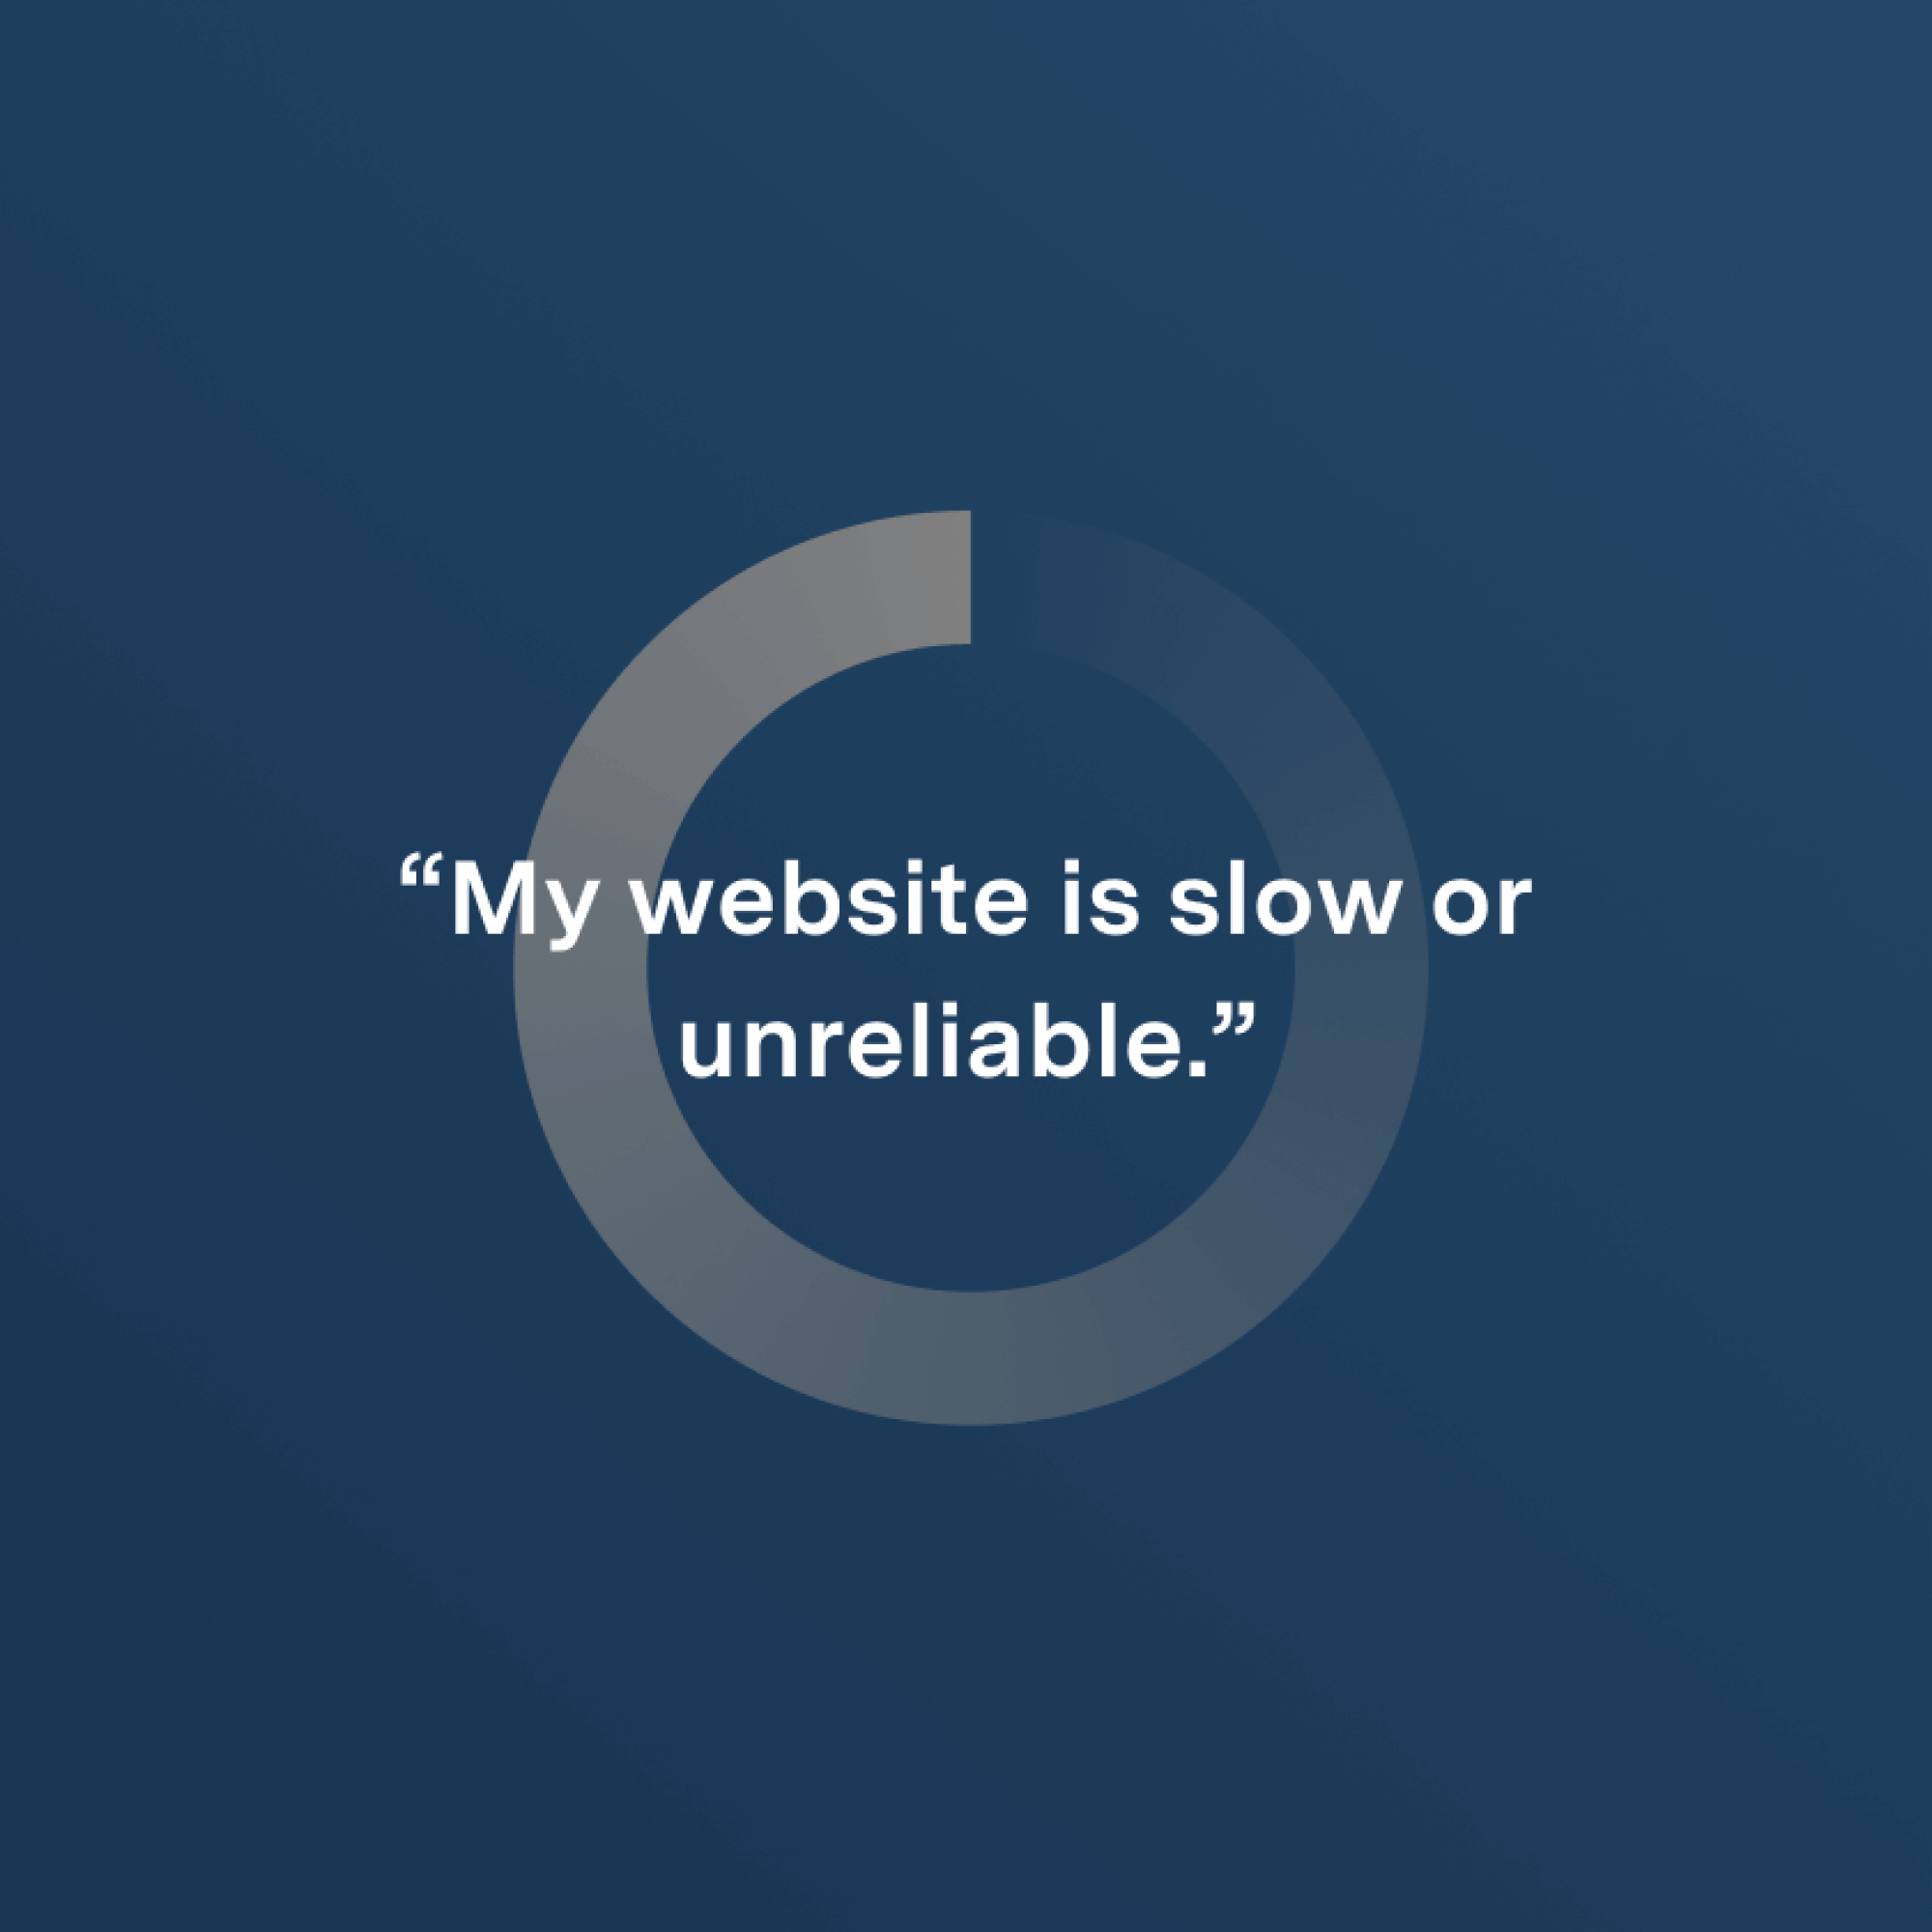 My website is slow or unreliable.